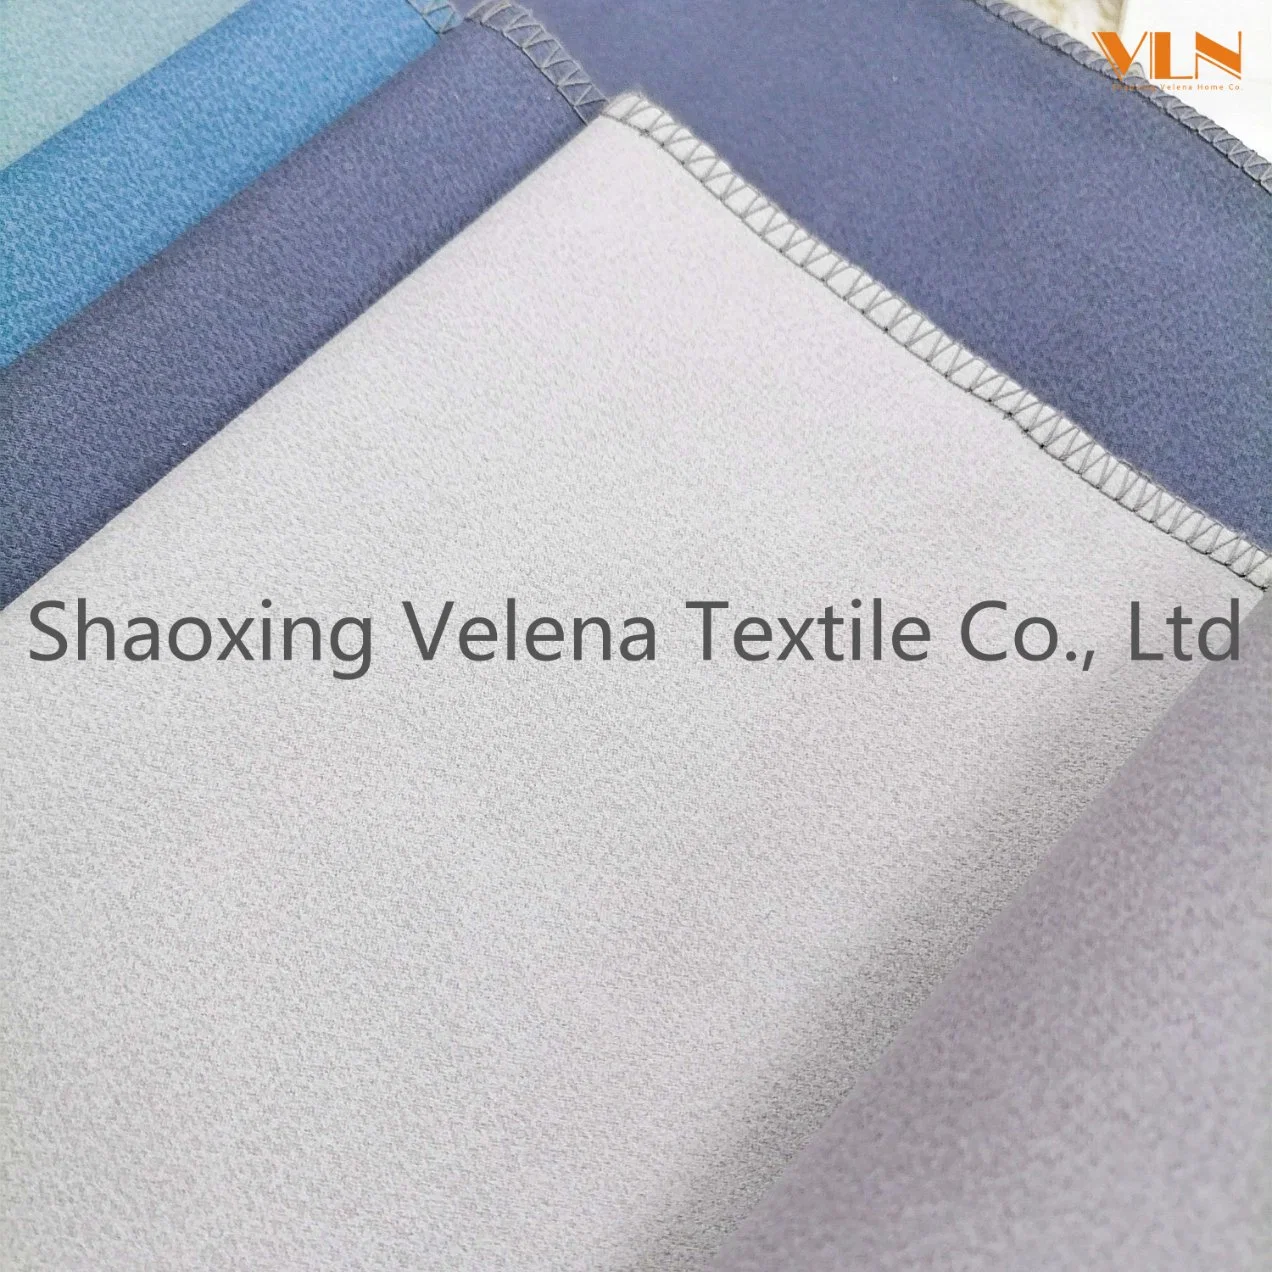 Technology Leather Suede 100% Polyester Velvet Fabric Dyeing with Glue Emboss Upholstery Furniture Sofa Textile Fabric